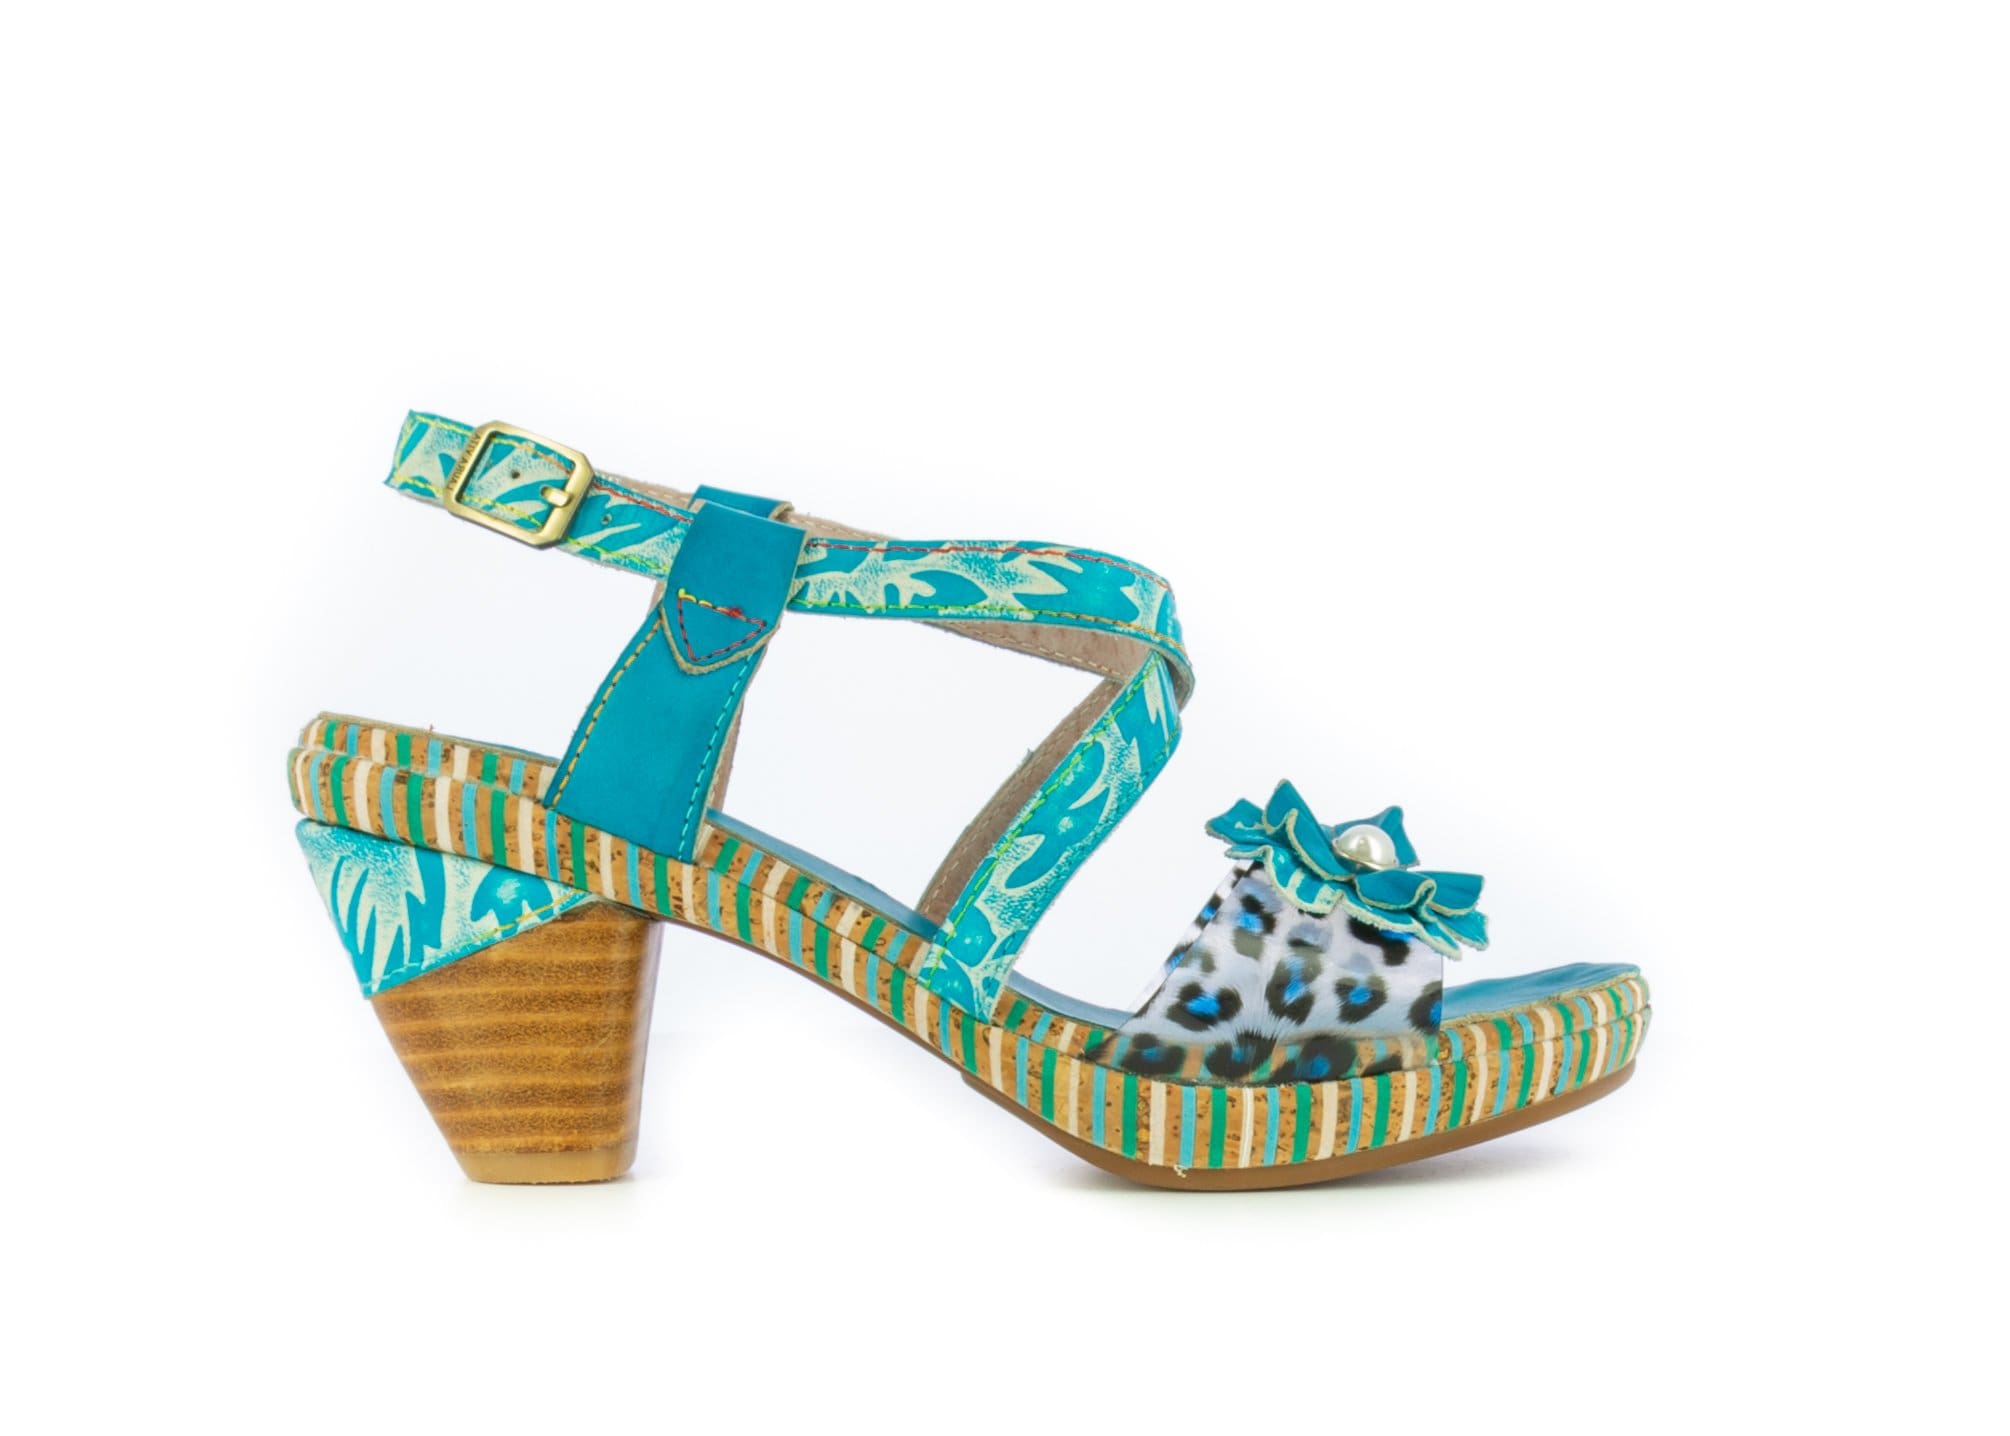 Shoes BECLFORTO 31 - 35 / TURQUOISE - Sandal